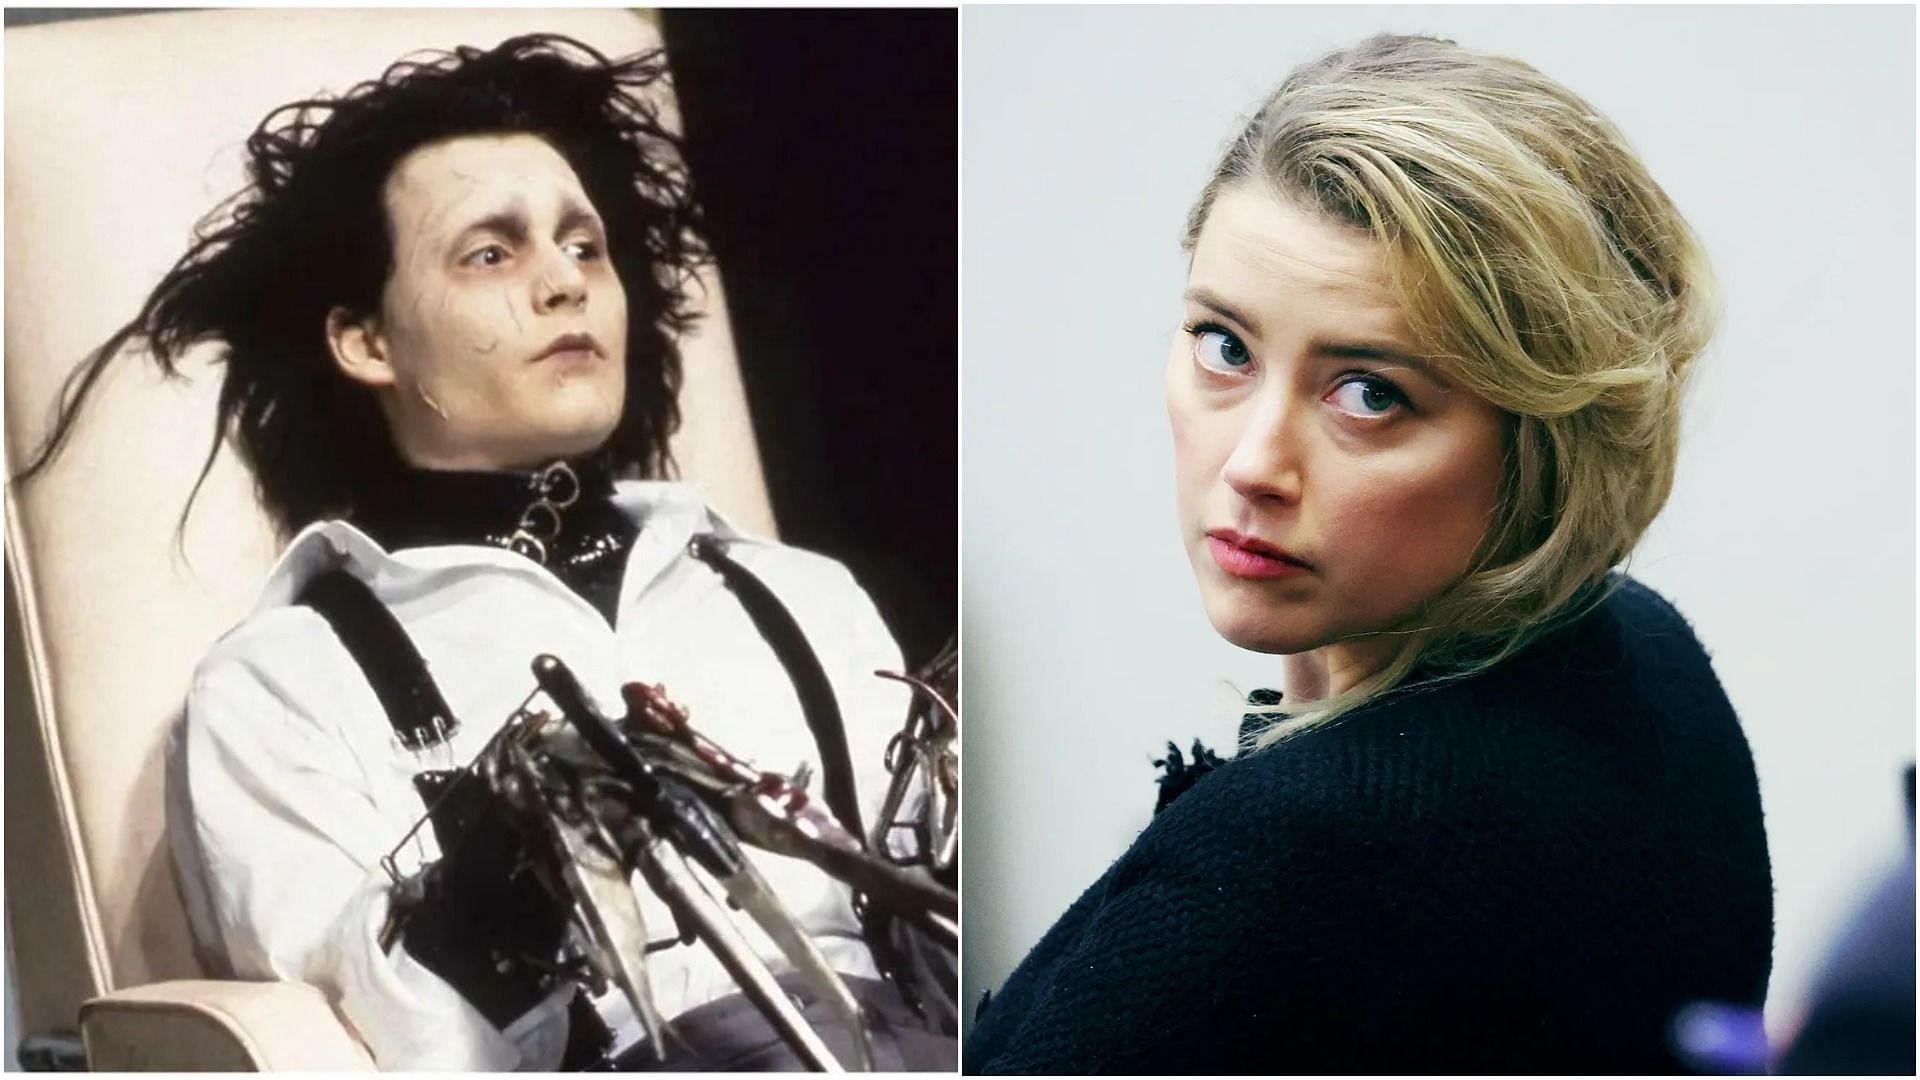 Johnny Depp as Edward Scissorhands and Amber Heard (Image via 20th Century Studios, and Michael Reynolds/Pool/AFP/Getty Images)